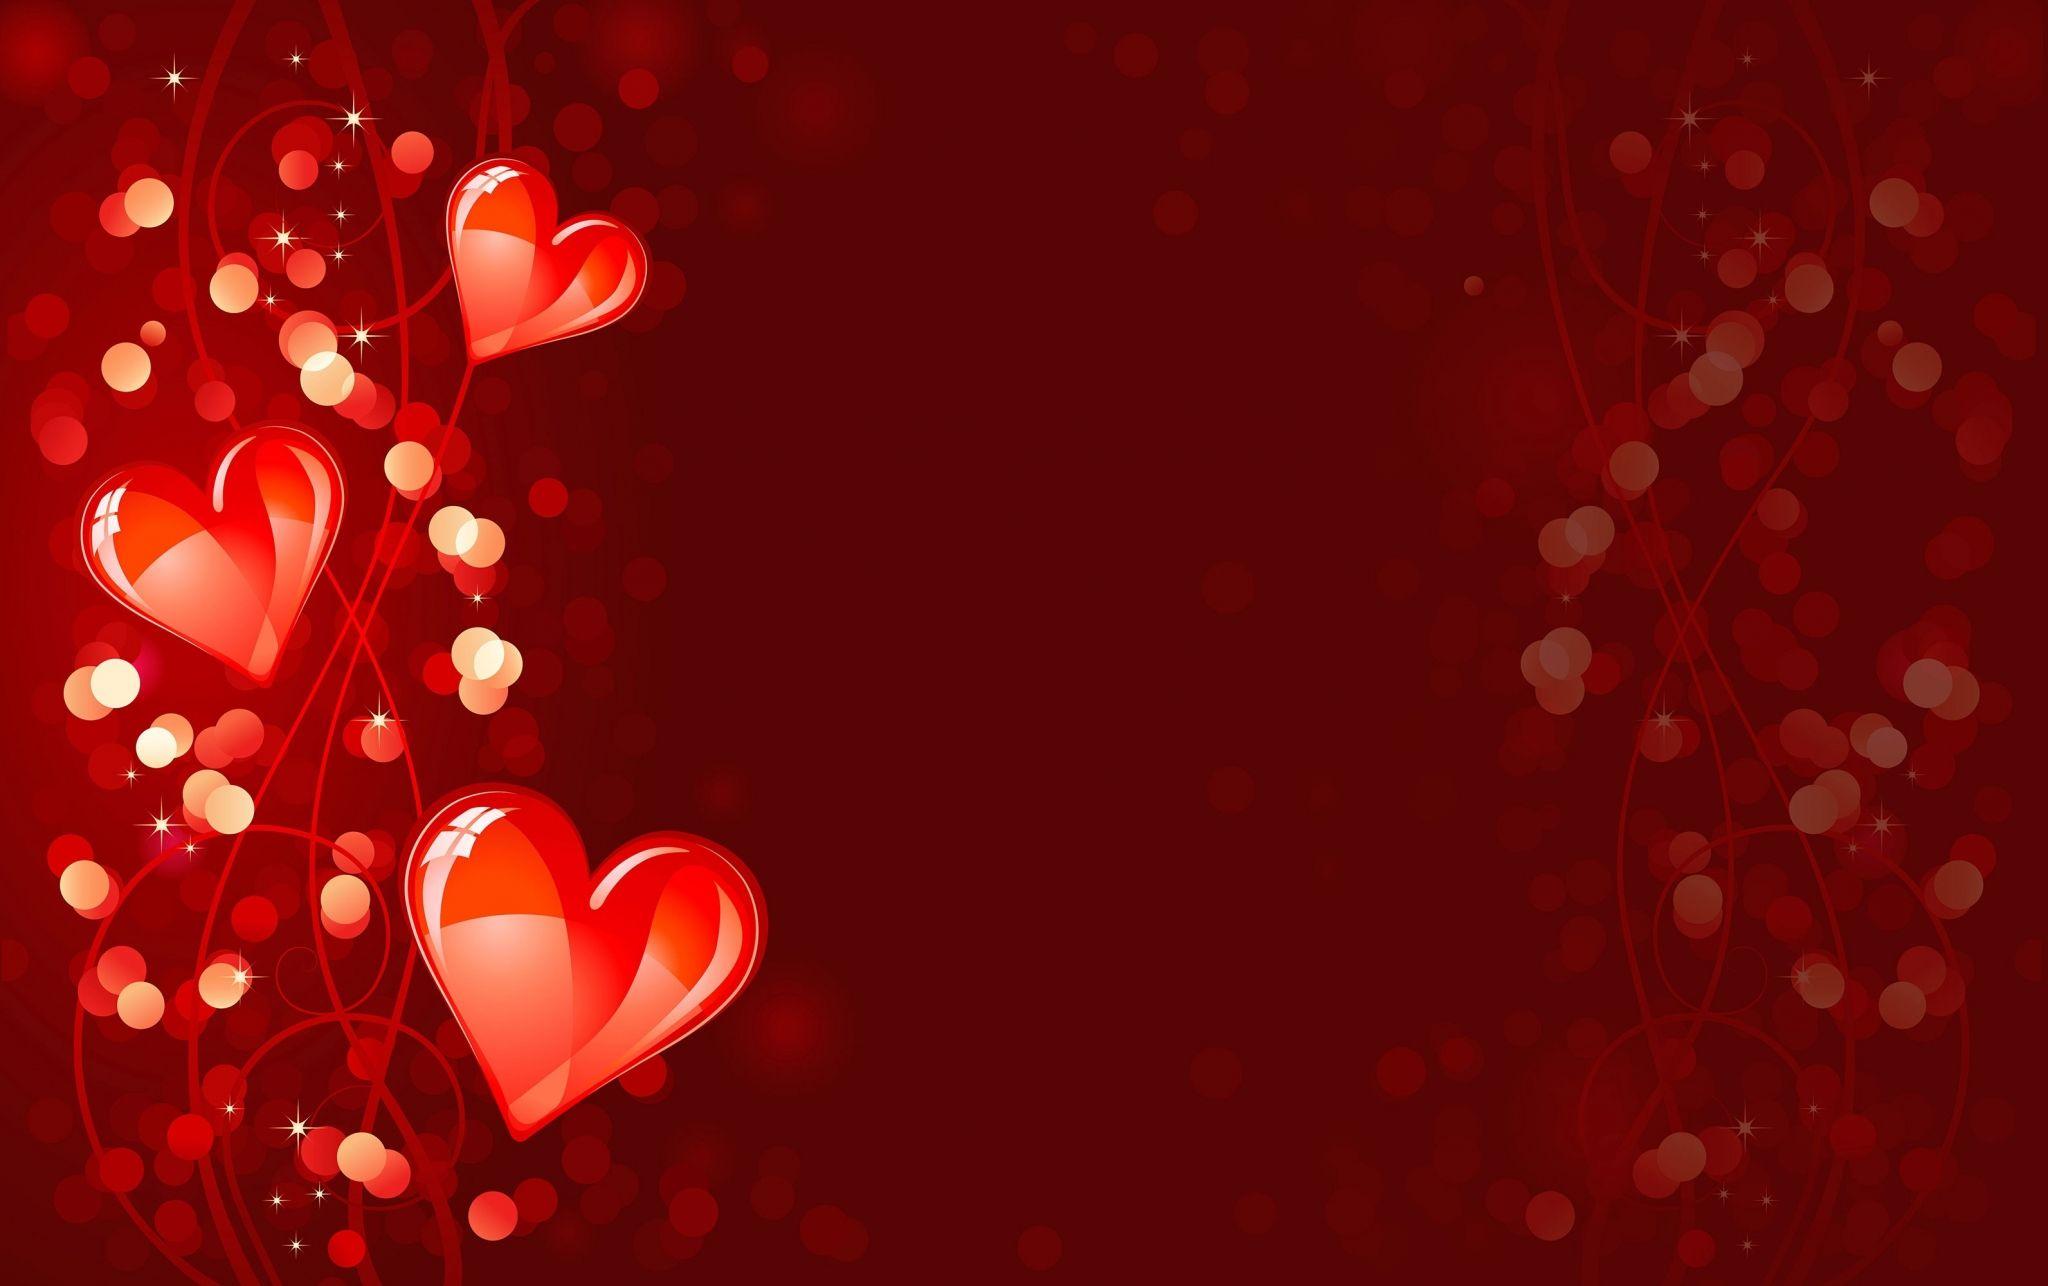 valentines day wallpaper pack 1080p HD .com